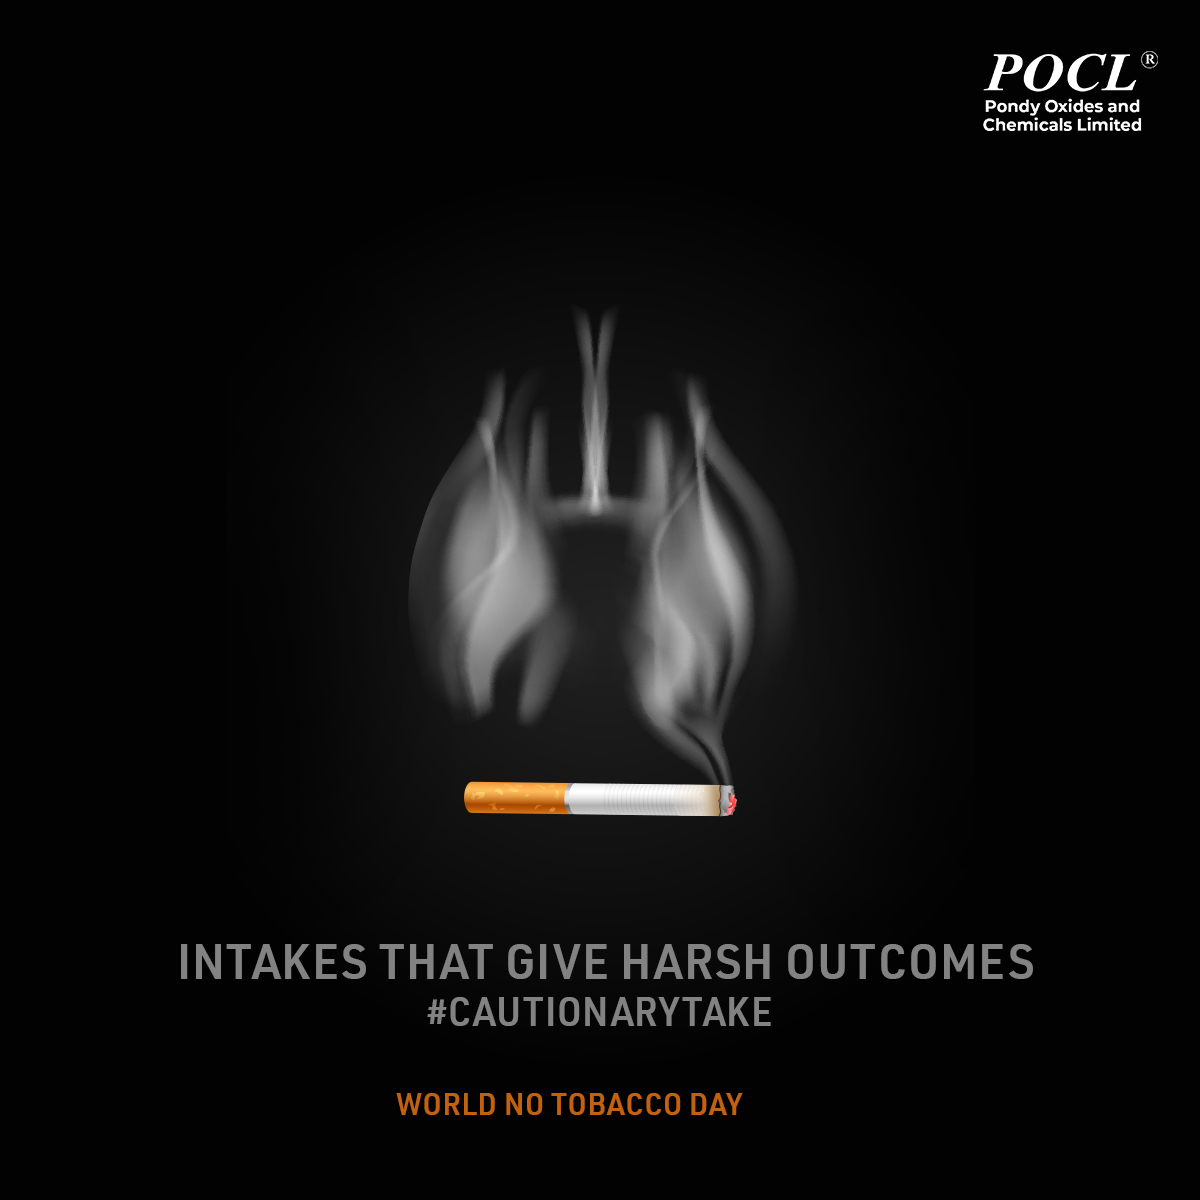 This #worldnotobaccoday, let us rise against the ingredient that causes mayhem to many. Quit smoking and using tobacco today.
#saveenviroment #nosmoking #sustainablepractices #quitsmoking #aluminiumrecycling #zinc #POCL